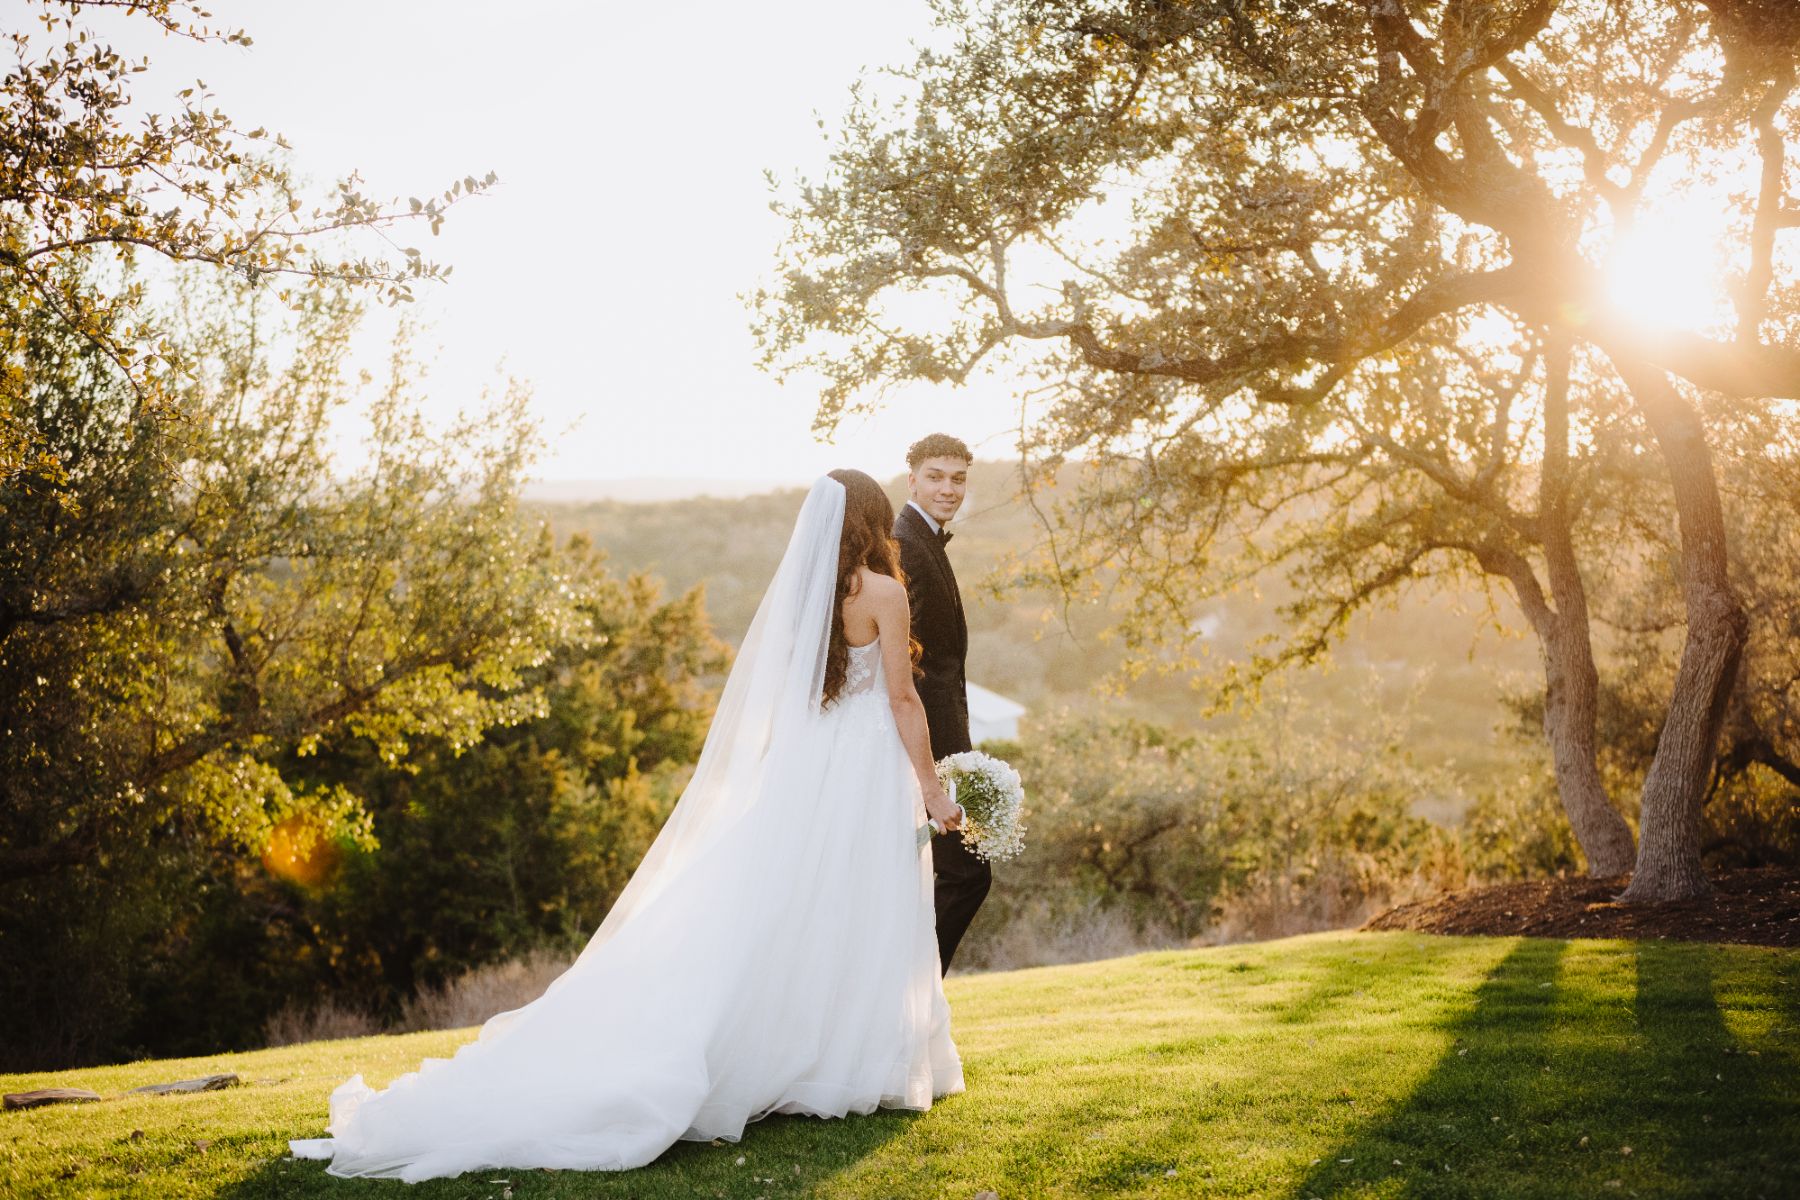 Bride and groom, walk, holding hands toward a large oak tree with the sun rays peeking through the tree during sunset at Canyonwood Ridge wedding venue.